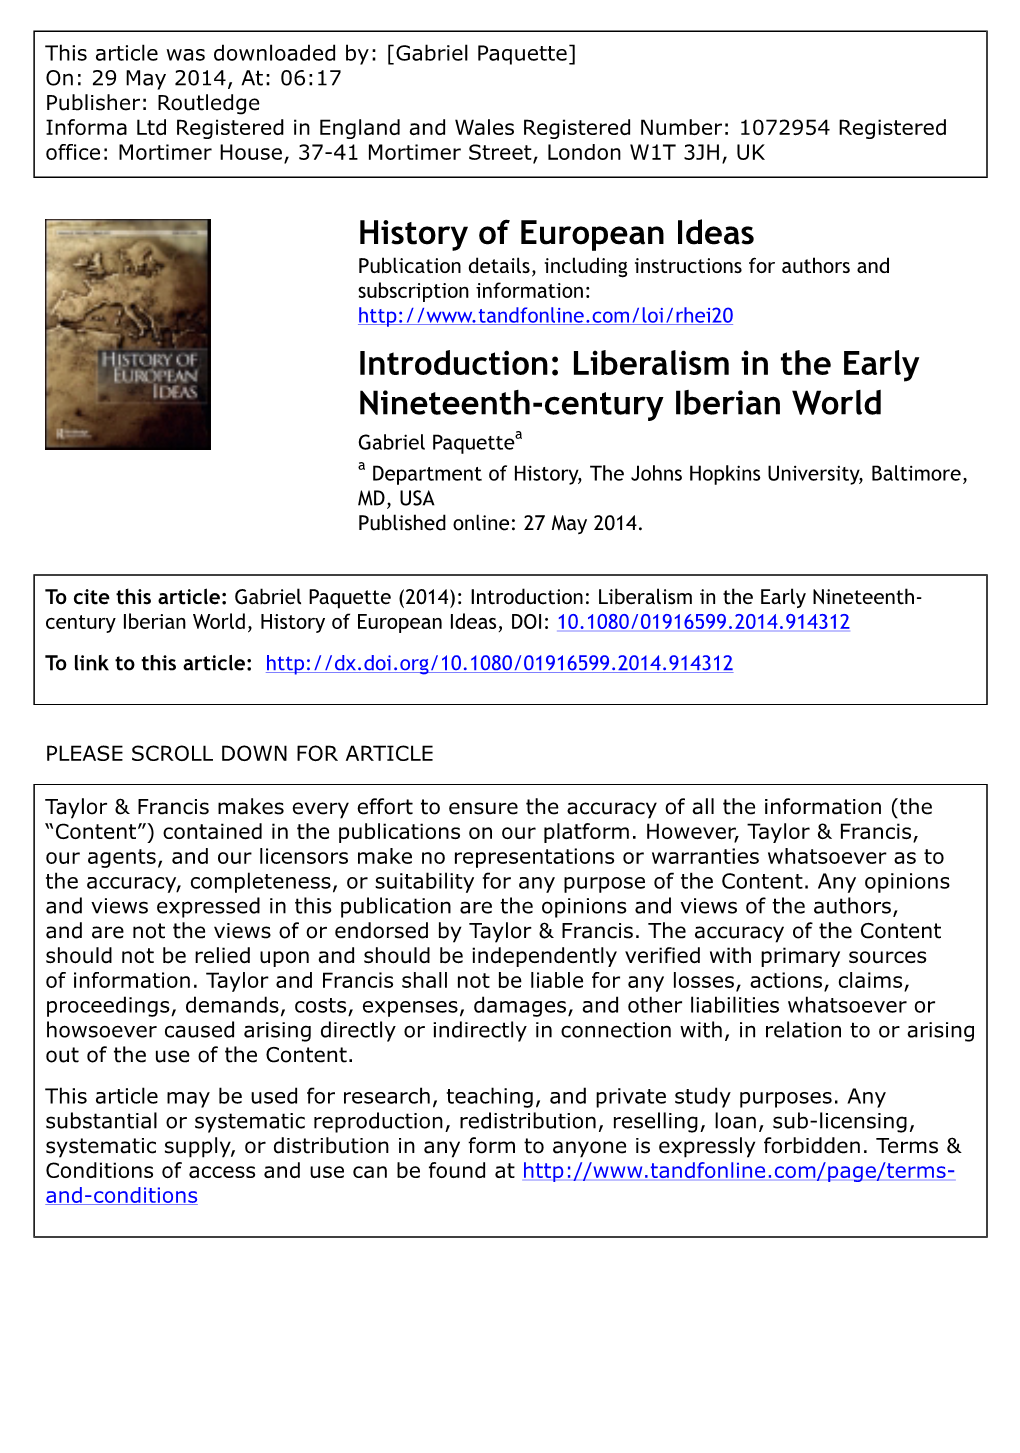 Introduction: Liberalism in the Early Nineteenth-Century Iberian World